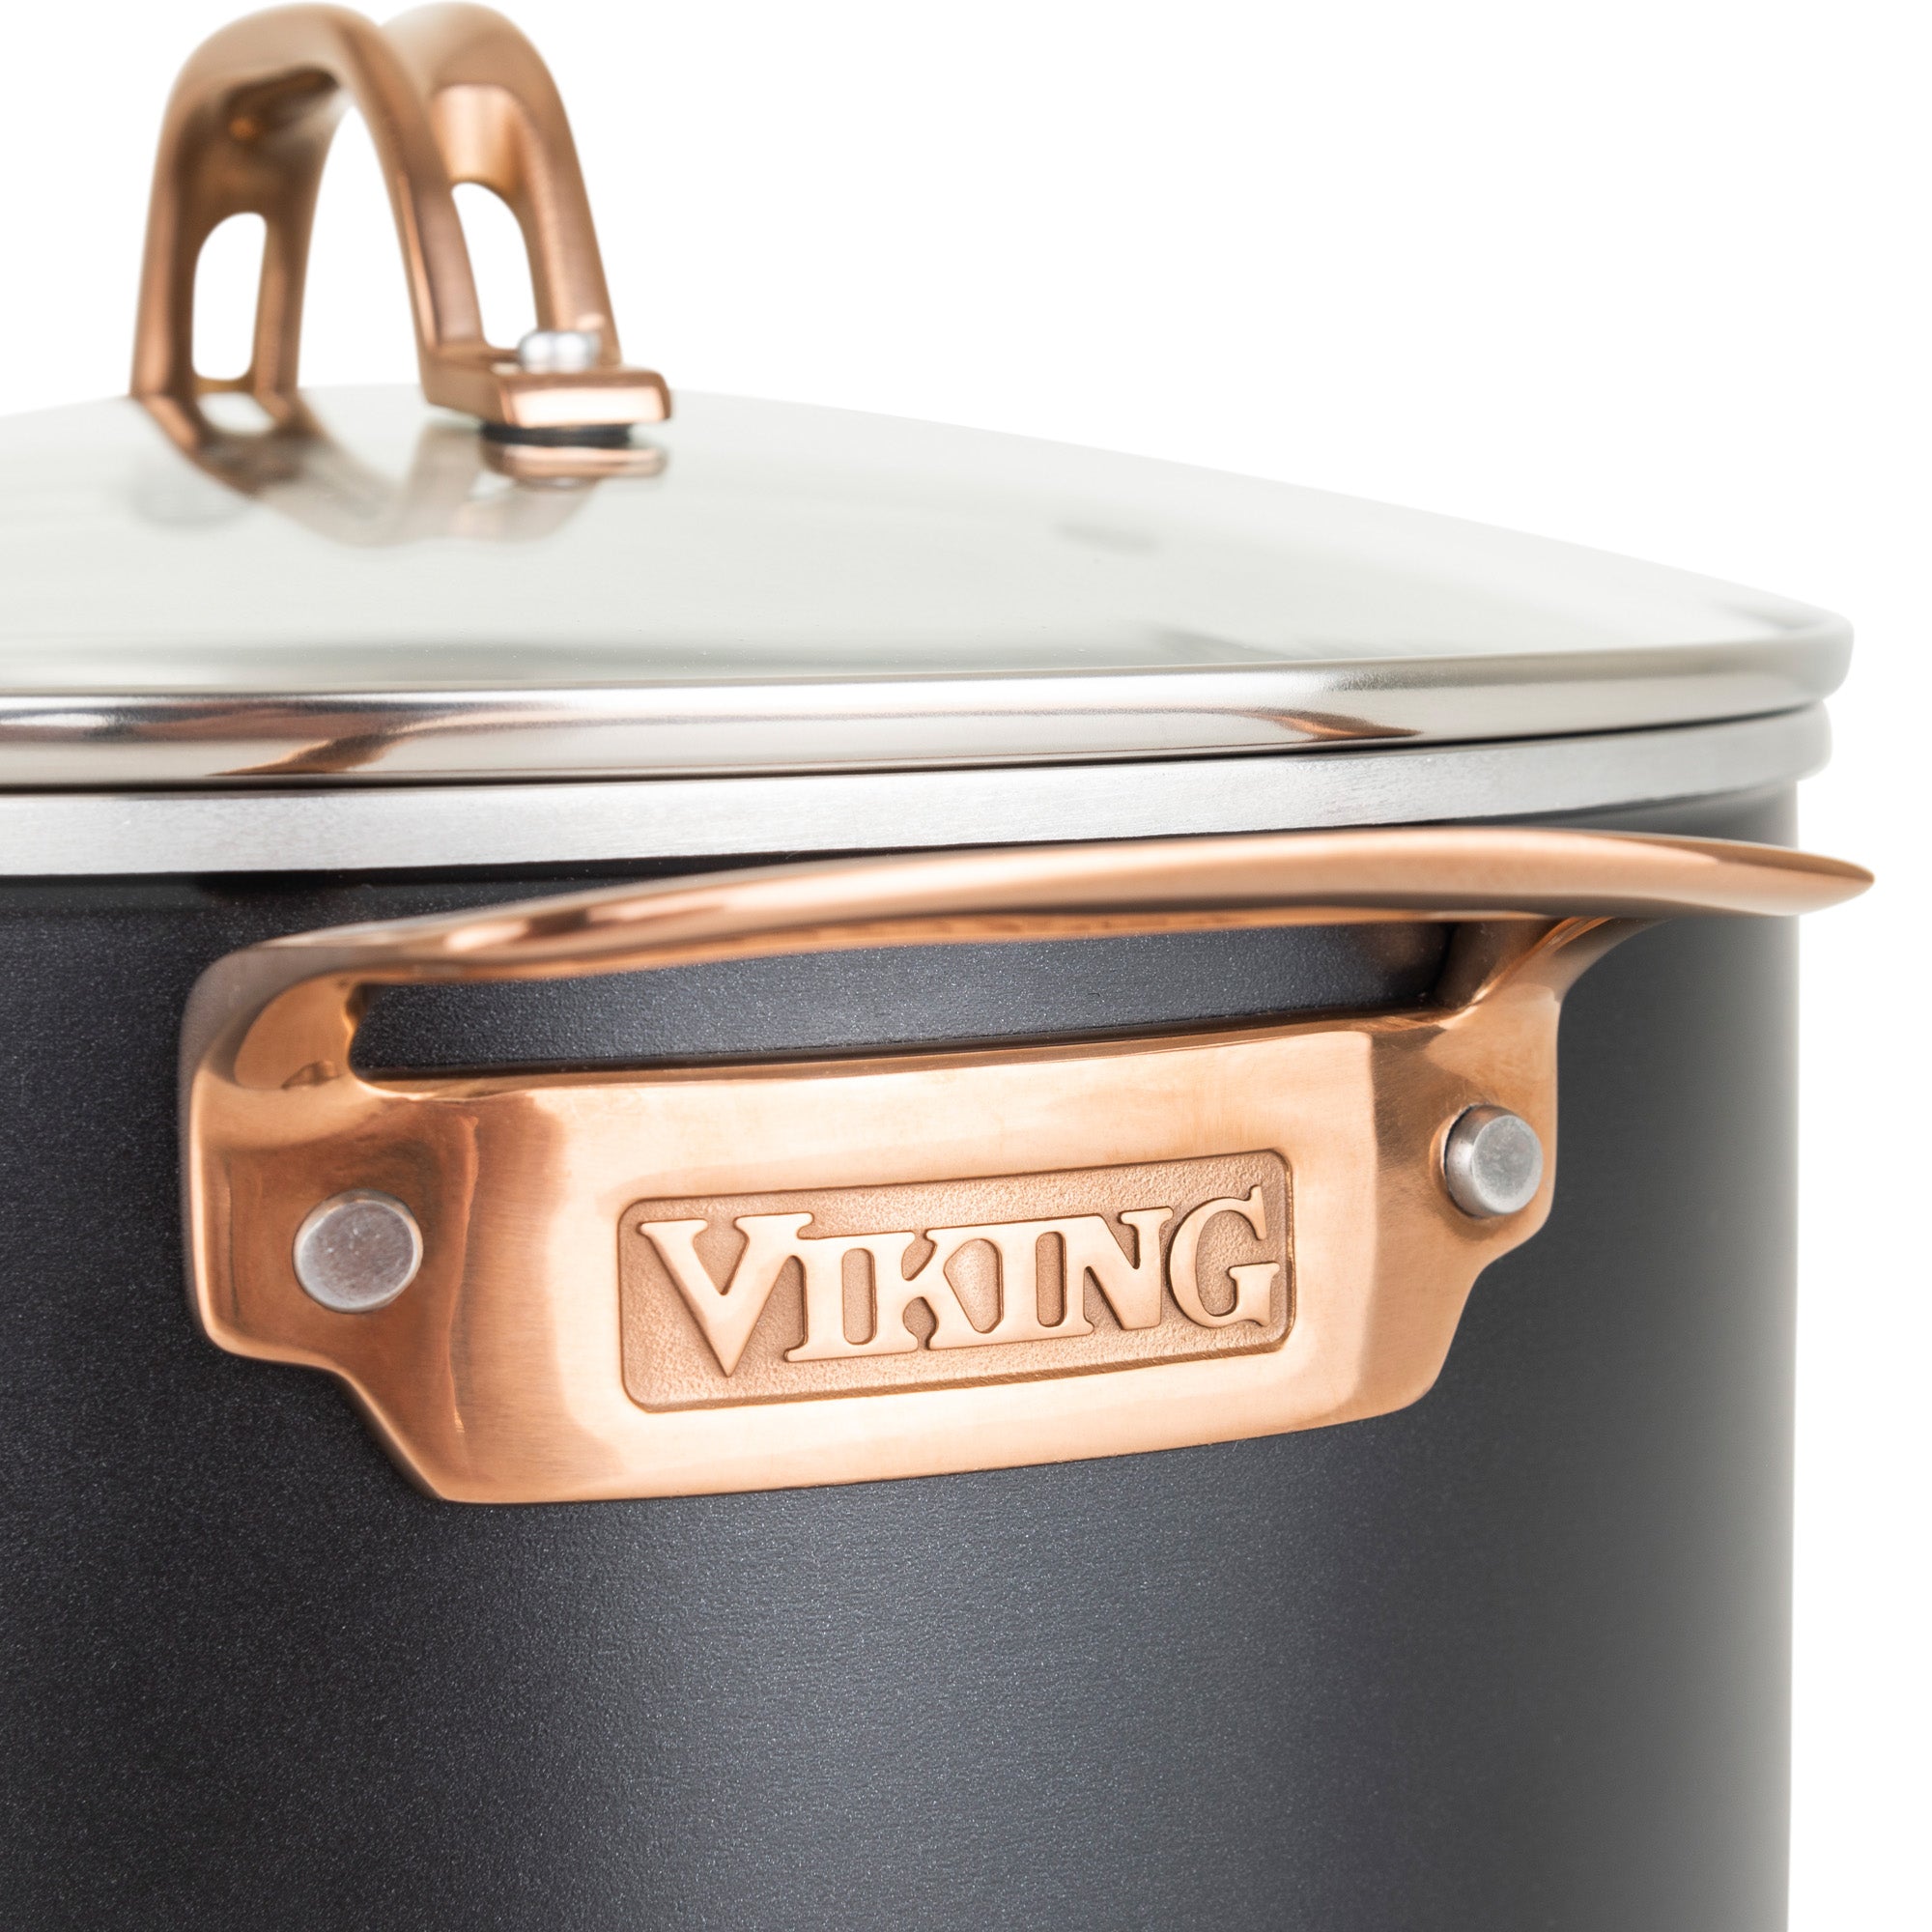 Viking Multi-Ply 2-Ply 11-Piece Blue Cookware Set with Glass Lids – Viking  Culinary Products